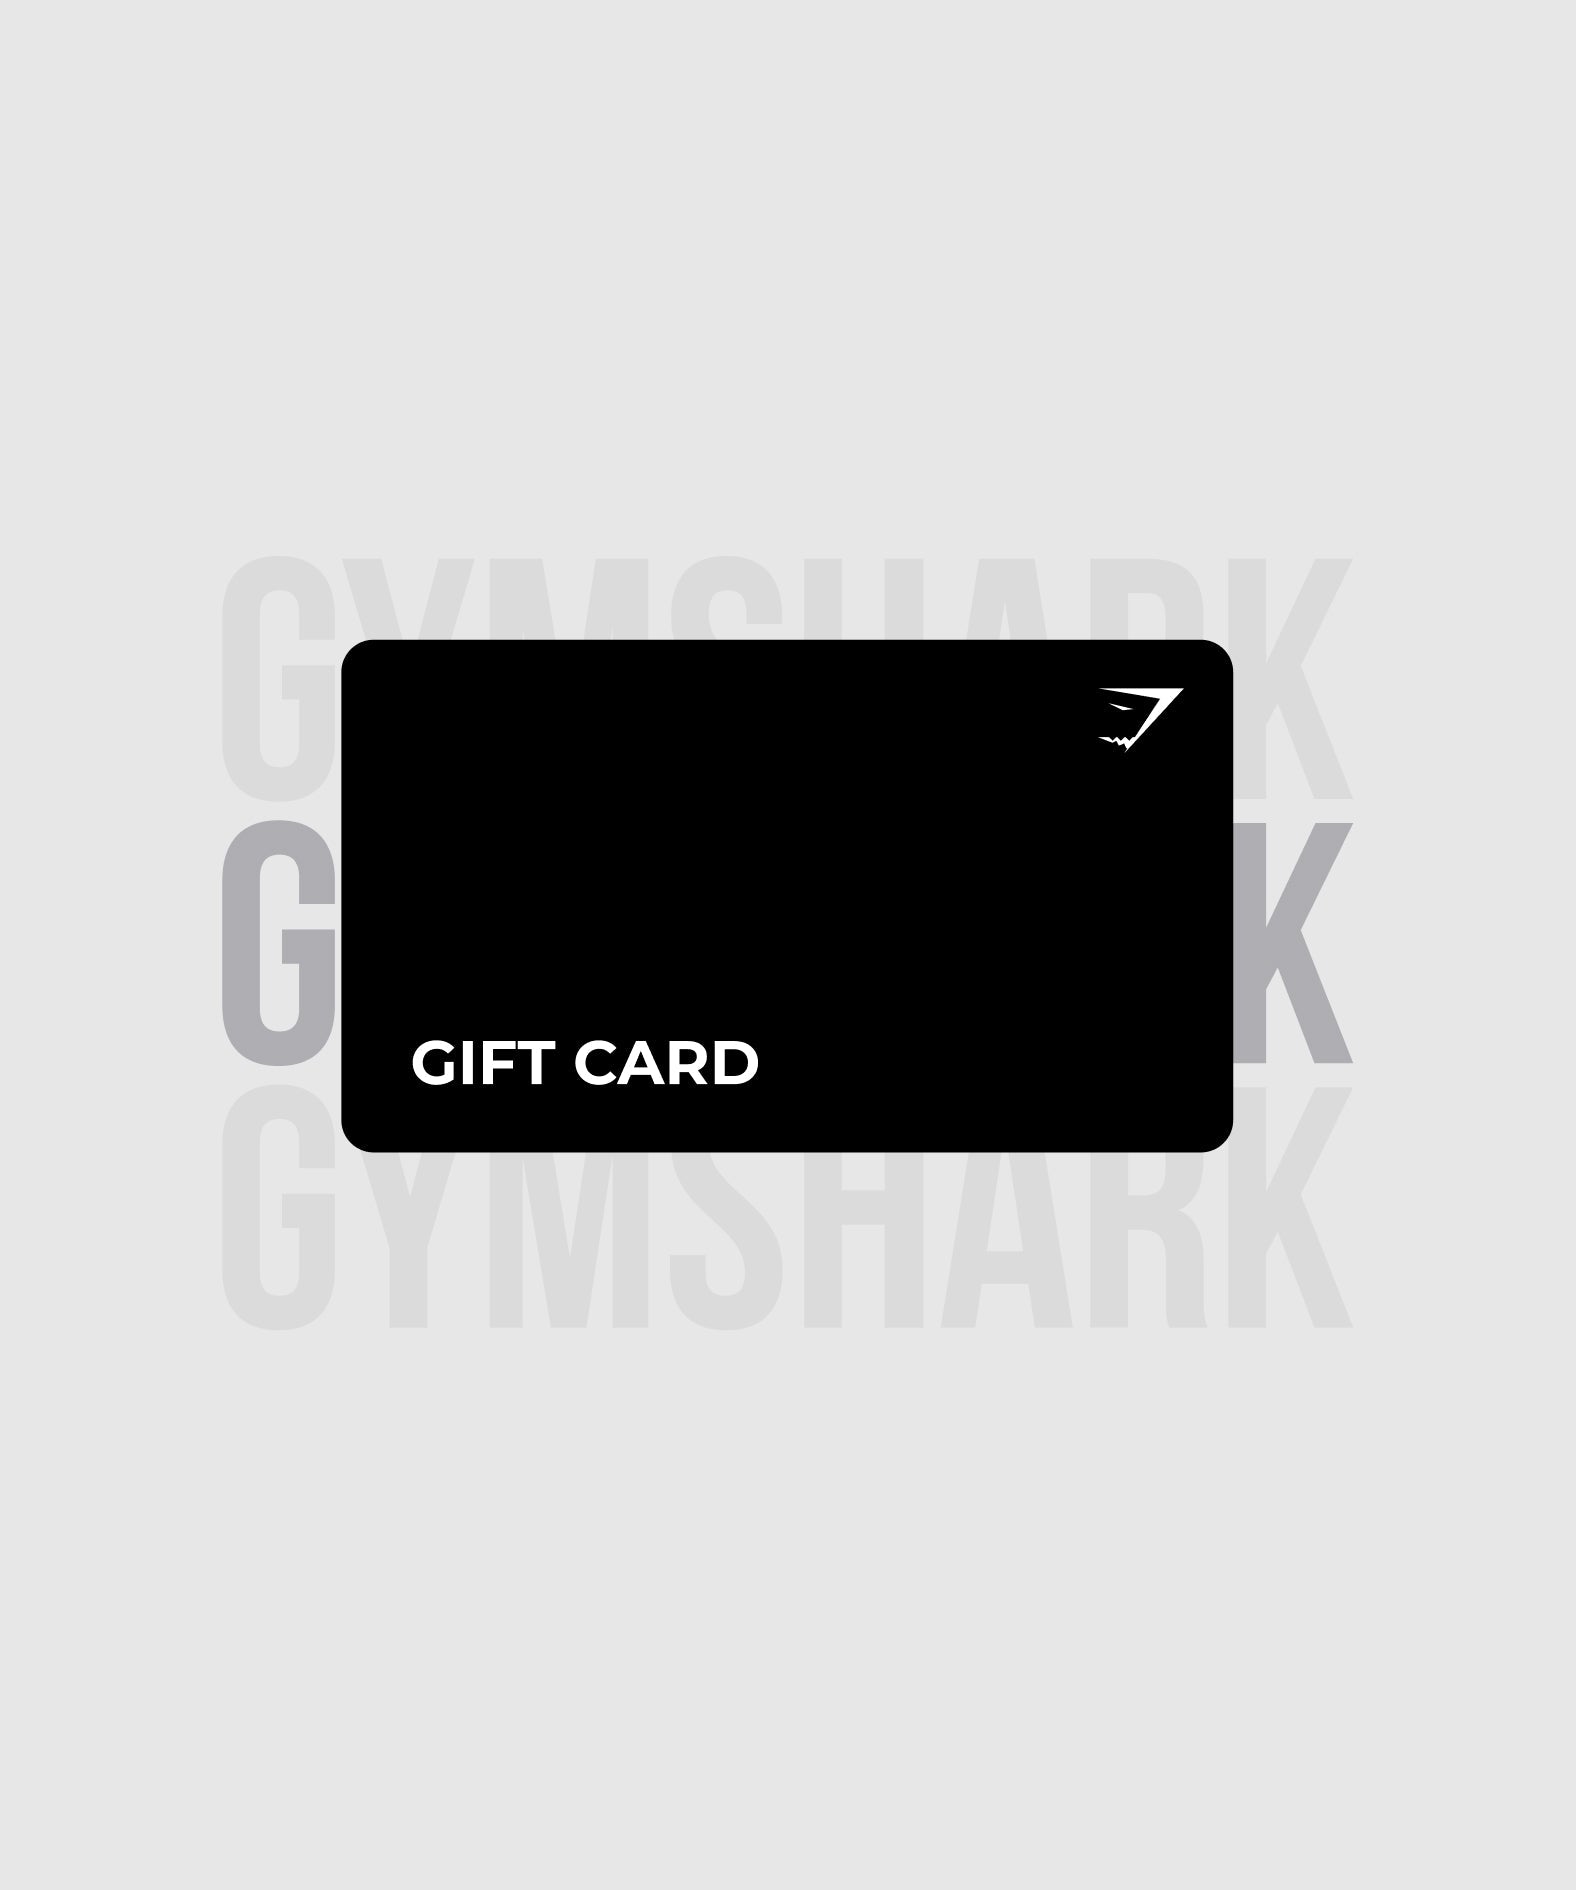 Apple launches unified gift card in Canada, Australia